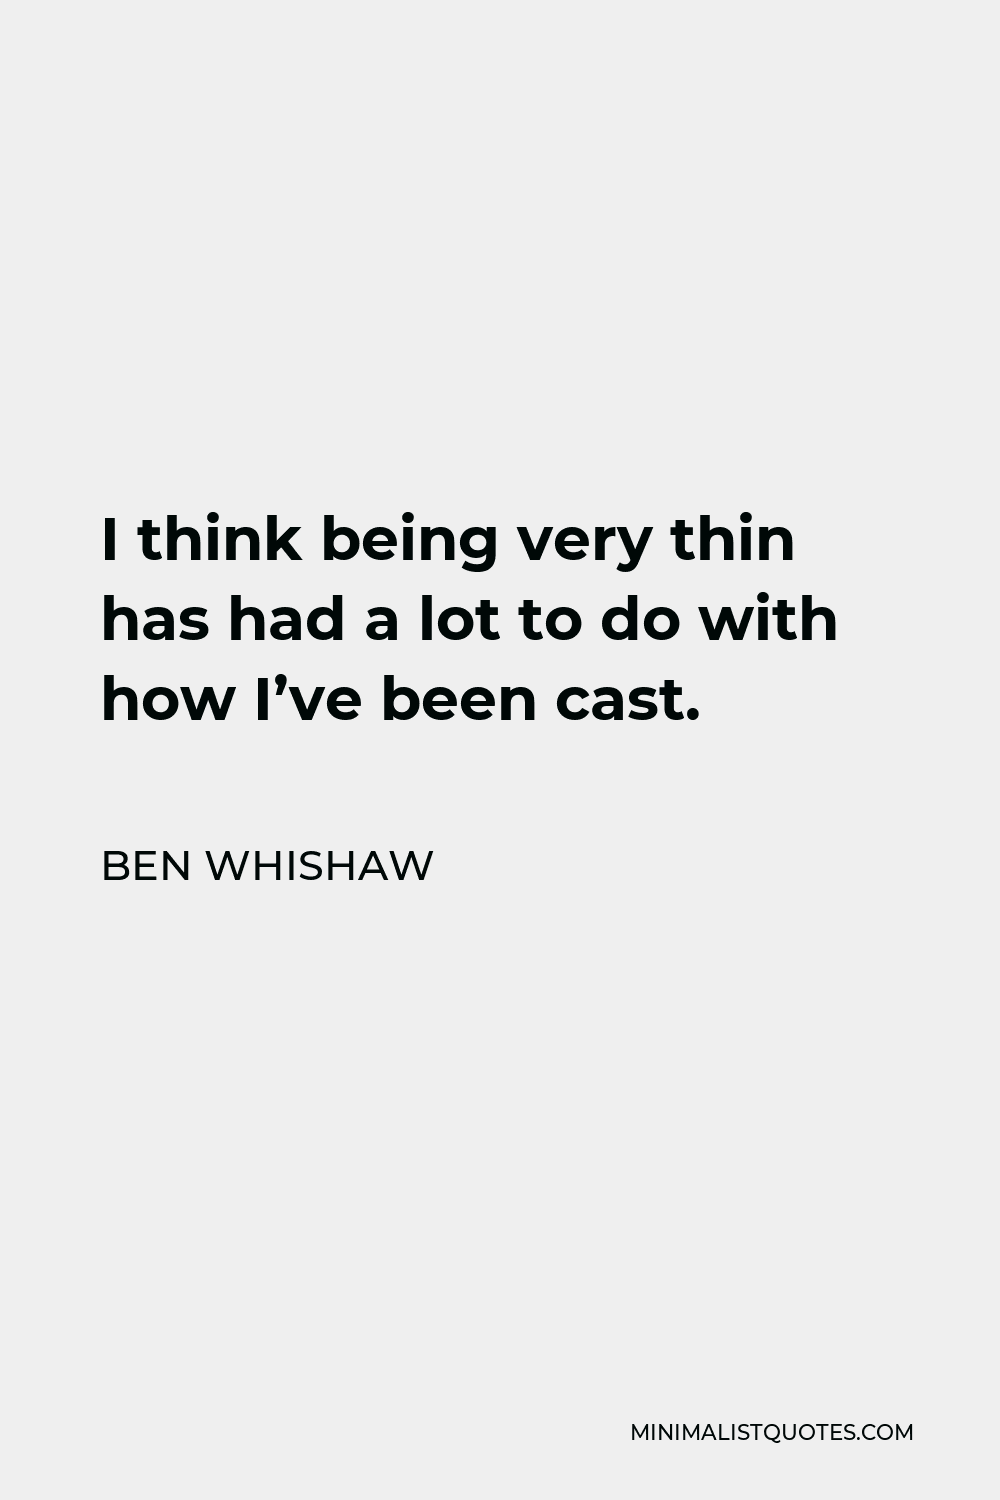 Ben Whishaw Quote - I think being very thin has had a lot to do with how I’ve been cast.